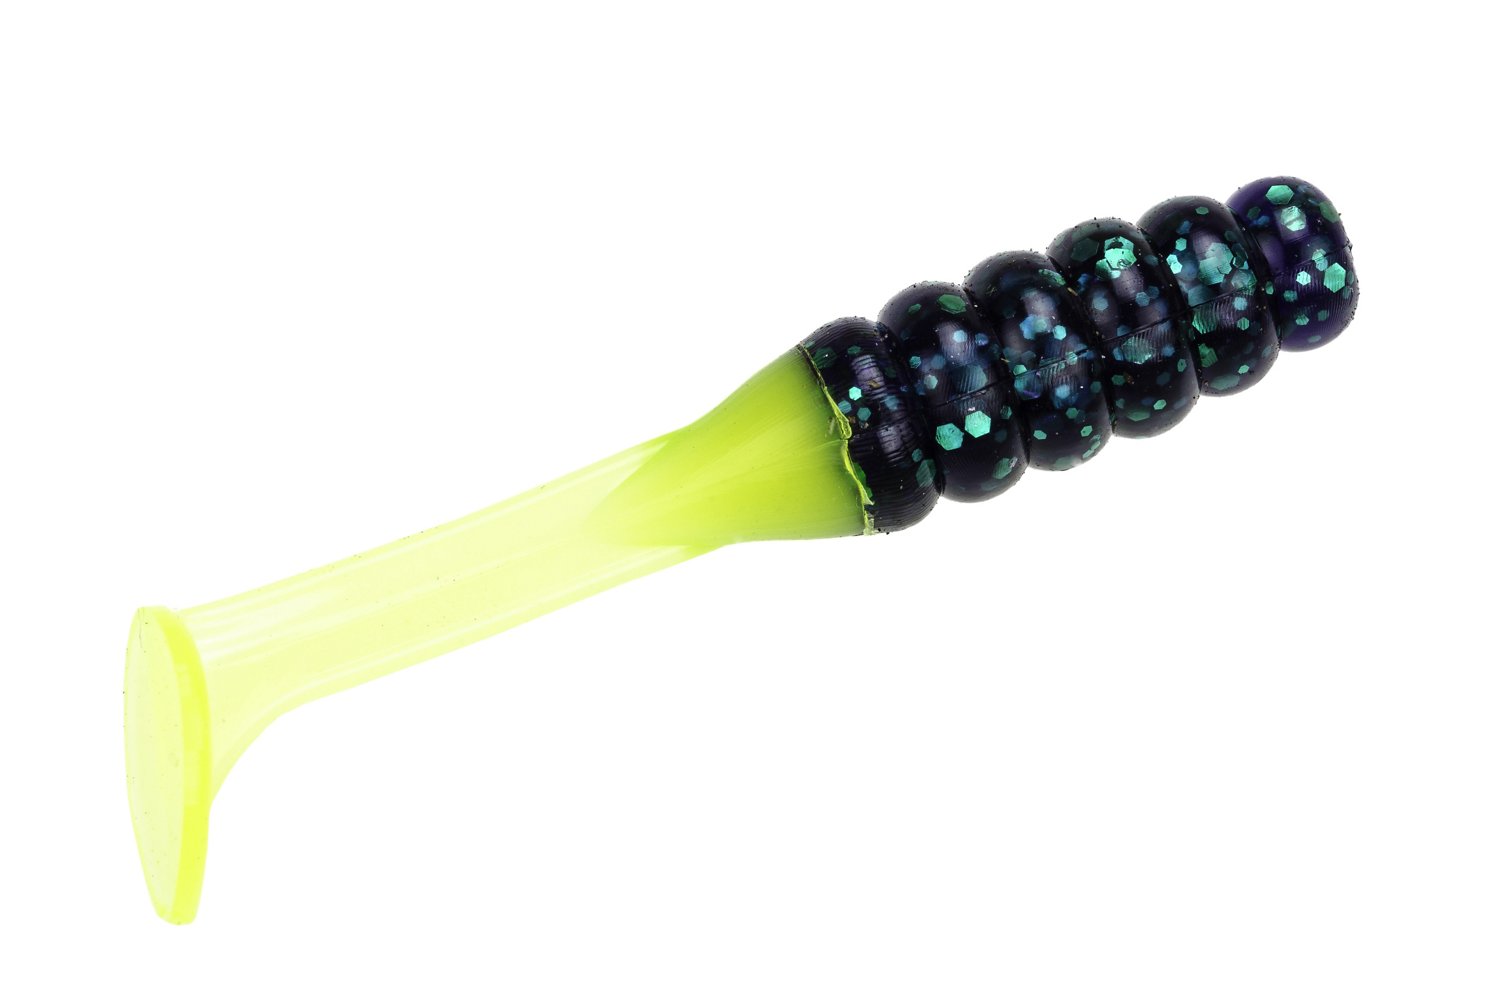  Strike King Lures Mr. Crappie Thunder Soft Baits